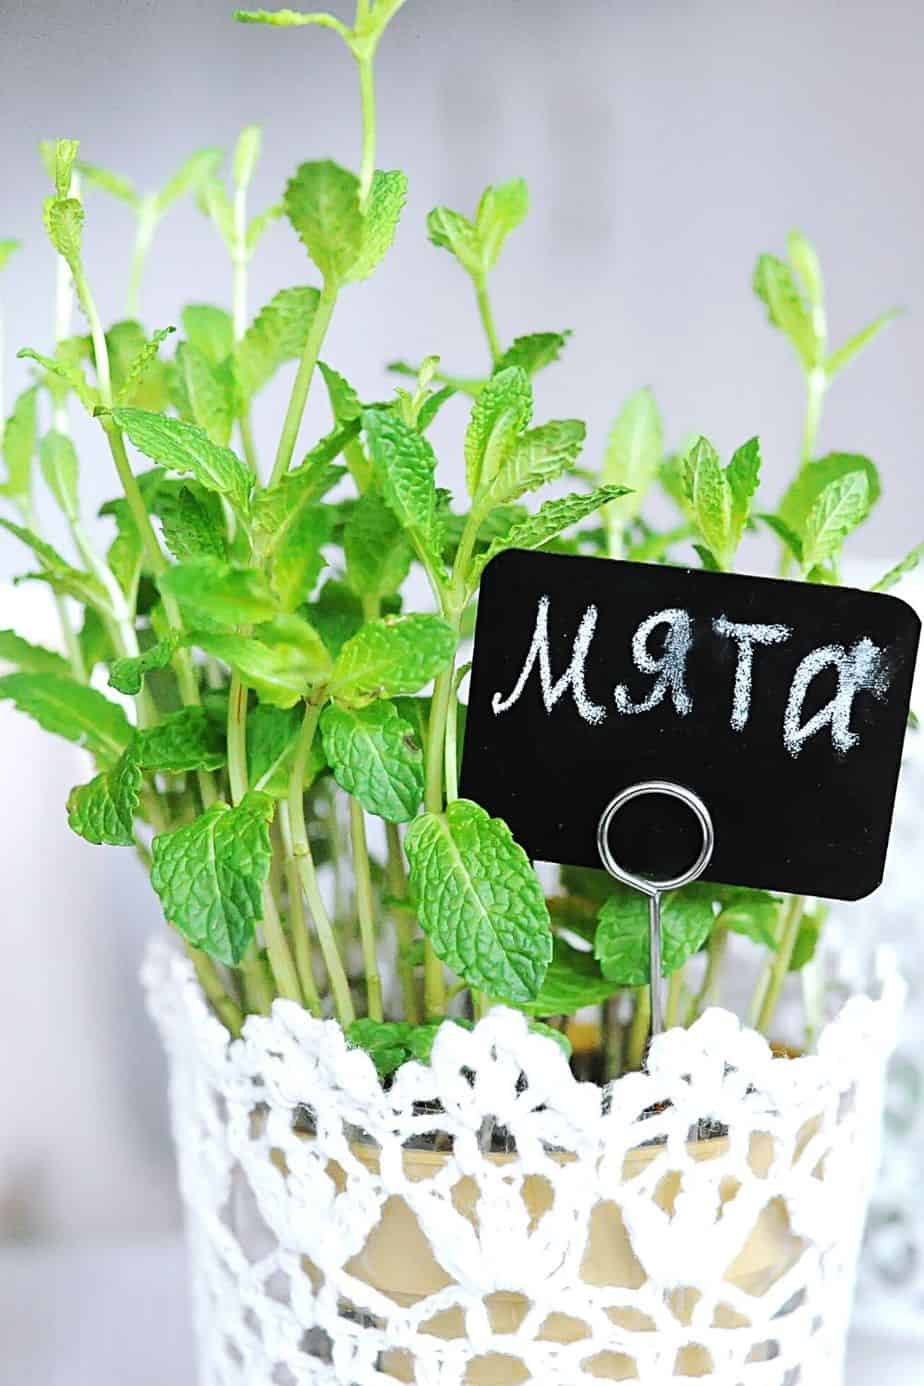 Mint is an herb that you can easily grow on your west-facing balcony